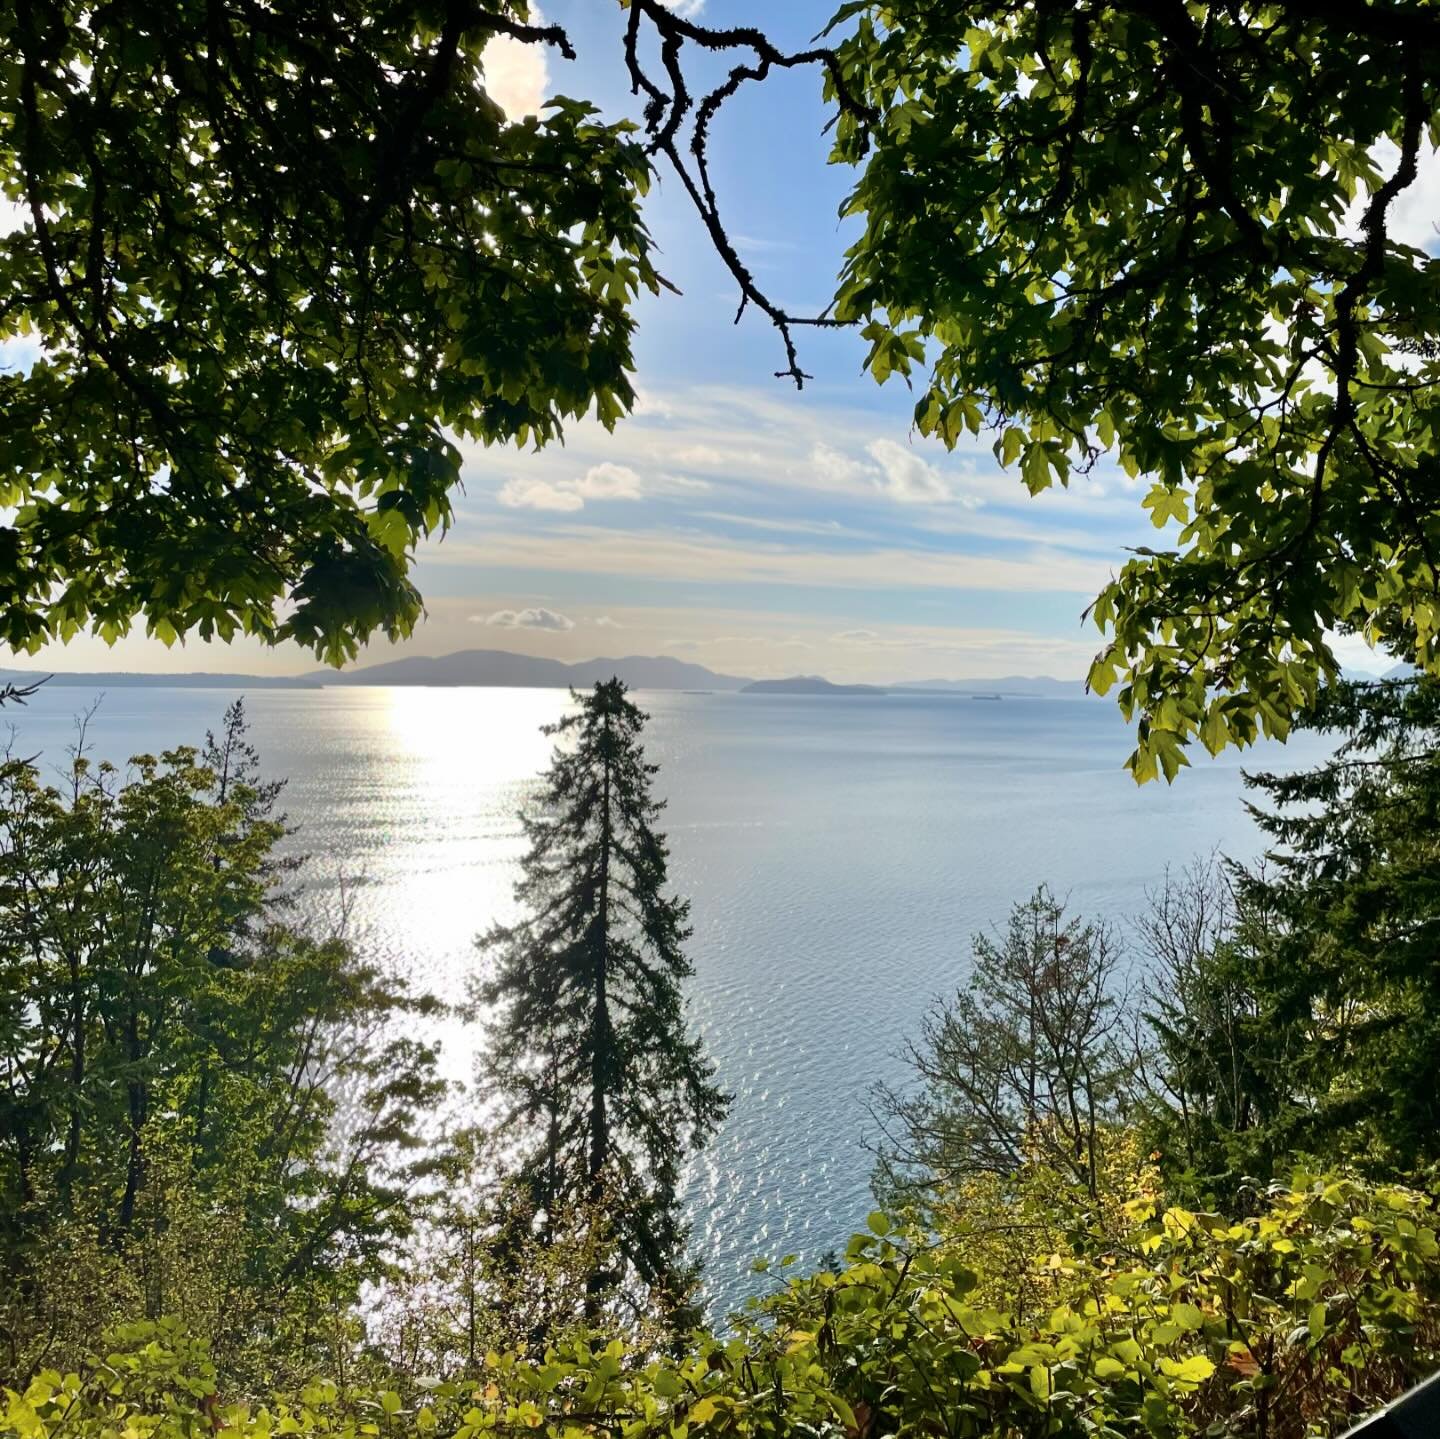 The viewpoint along Chuckanut Drive Scenic Byway is another one of my favorite places to show visitors with its exceptional view of the San Juan Islands. They call this drive the &ldquo;Big Sur of Washington,&rdquo; which I find a little amusing sinc